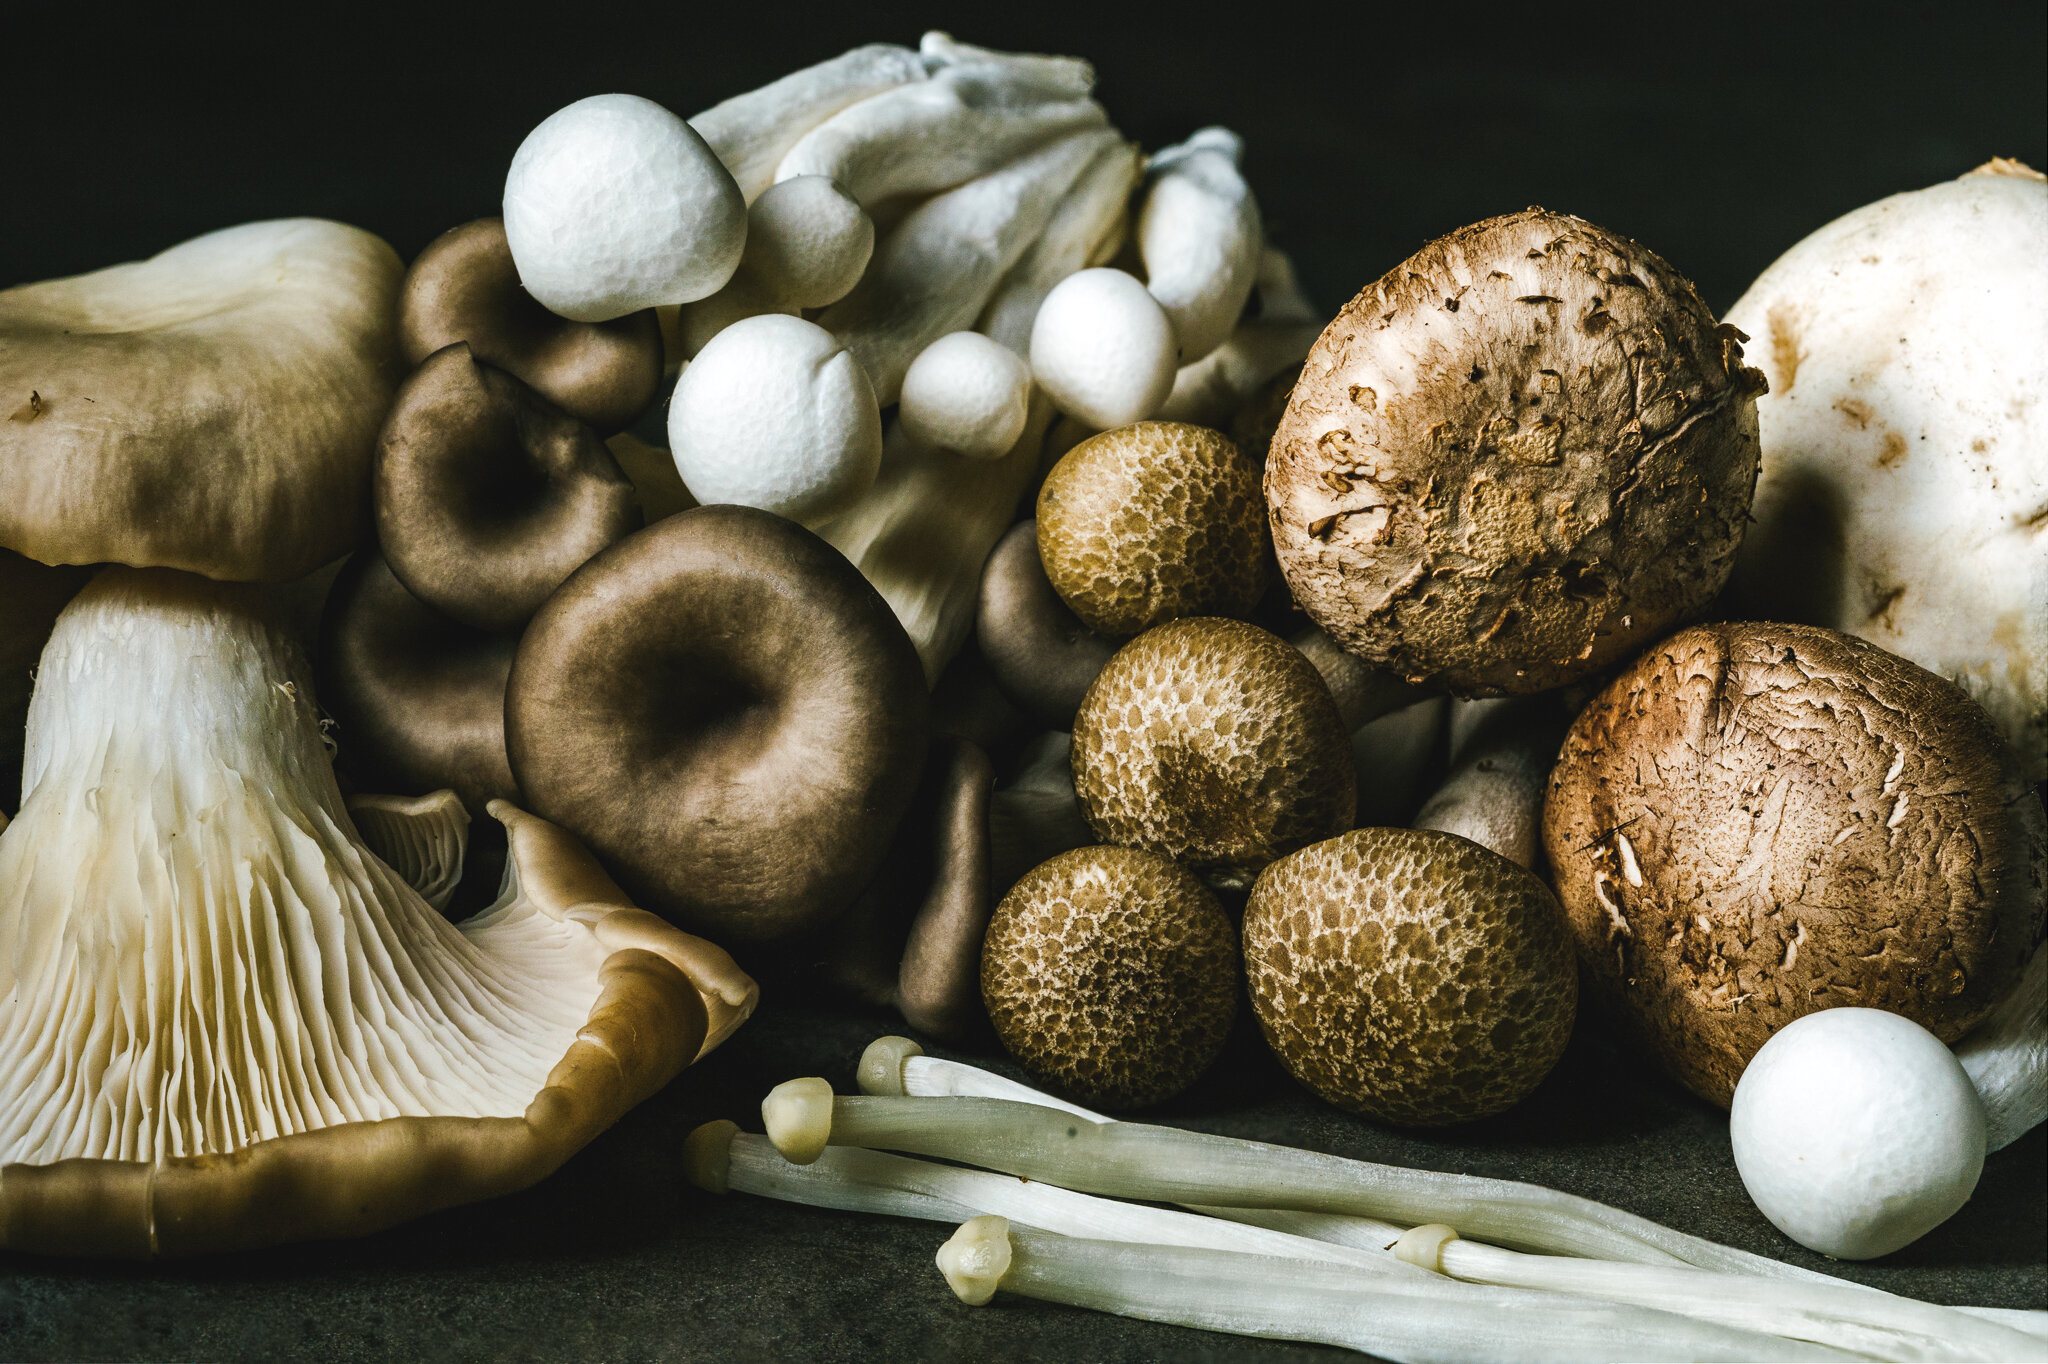  An assortment of mushrooms shot with a Sony 90mm Macro Lens. By Vietnam photographer, Lee Starnes 